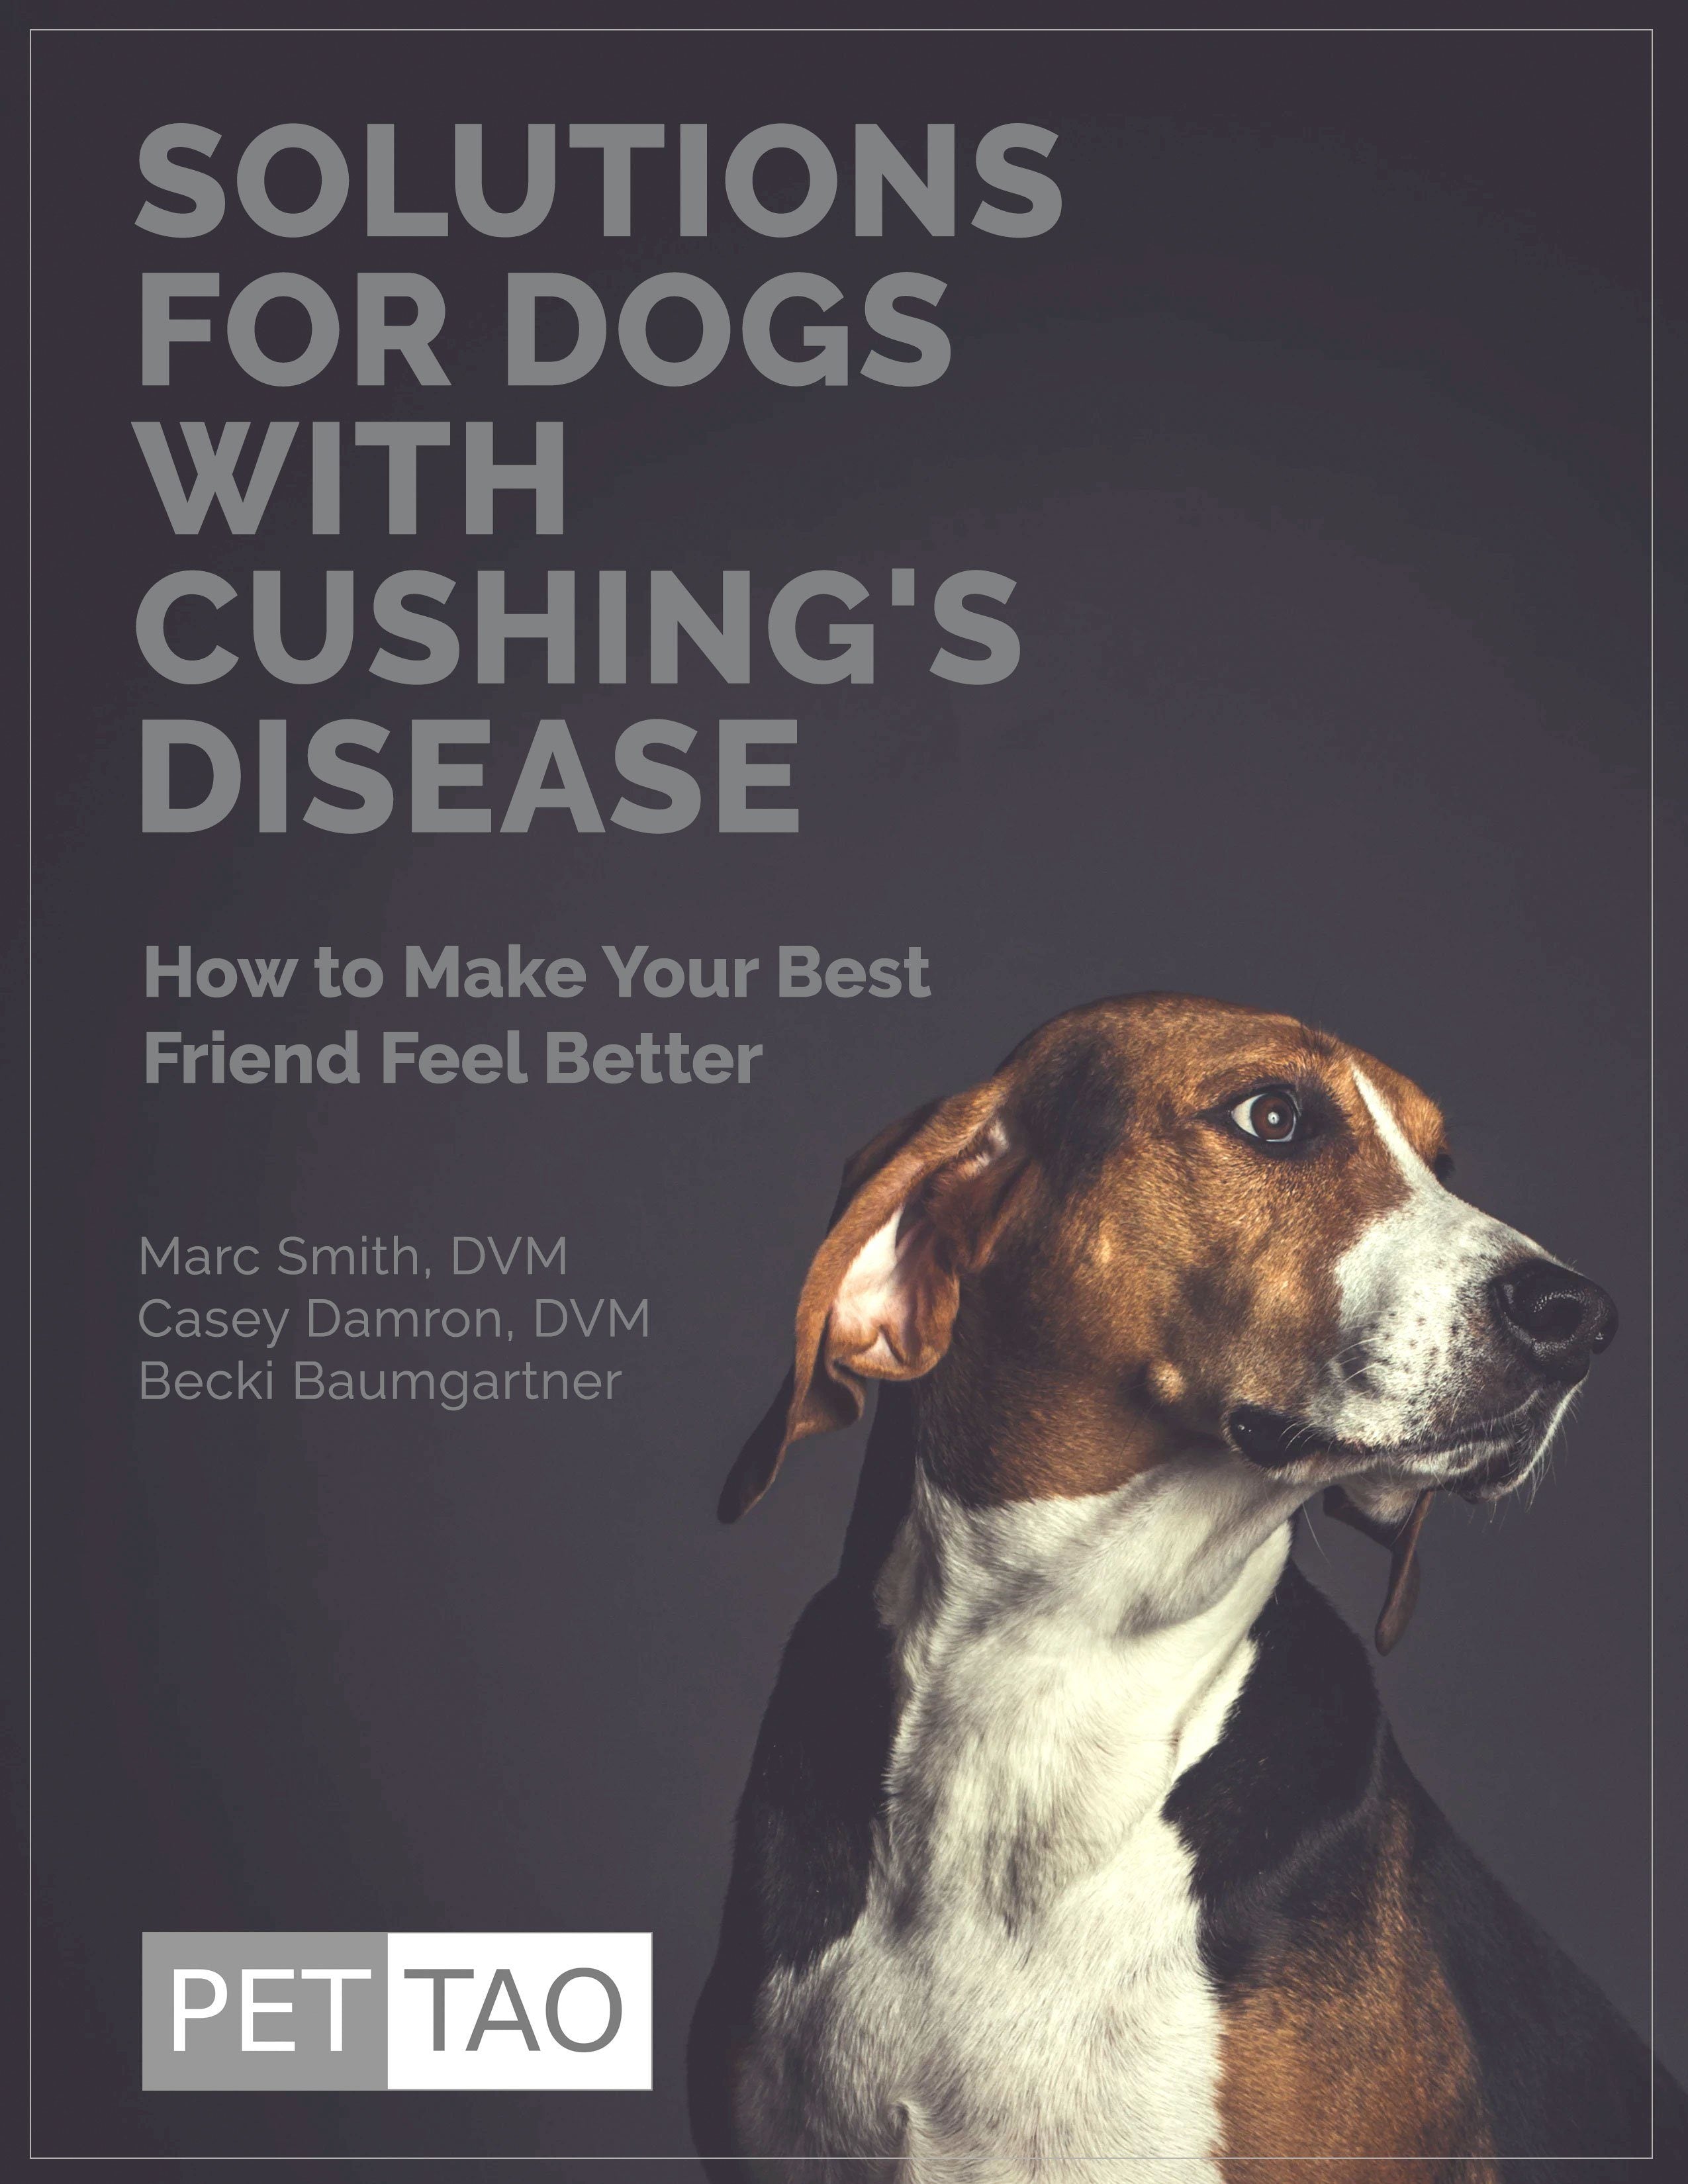 Solutions for Dogs With Cushing's Disease - Instant Ebook Download